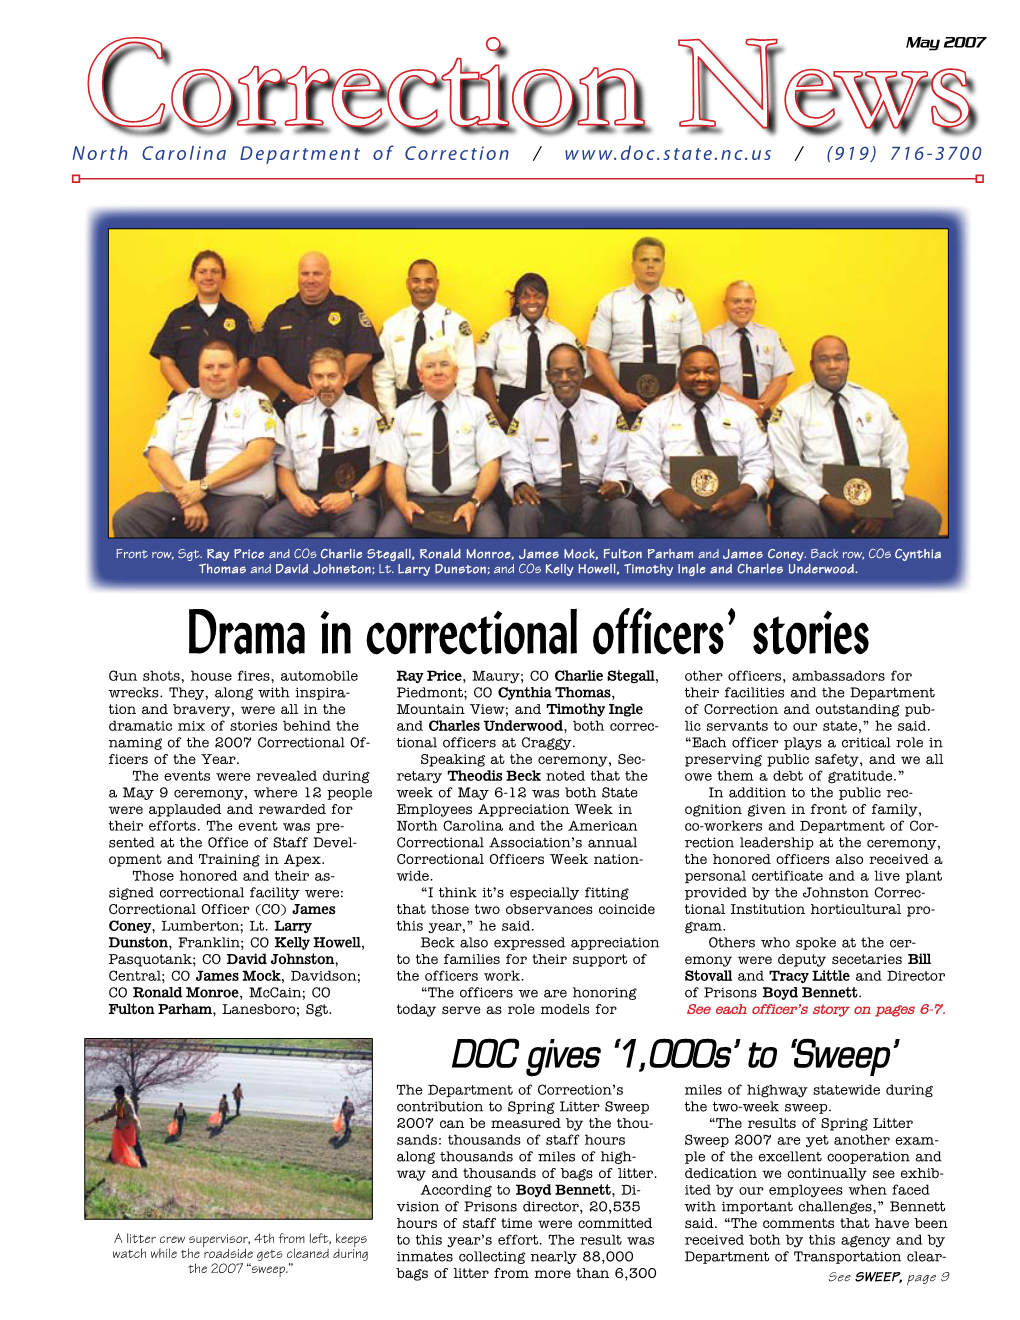 Drama in Correctional Officers' Stories